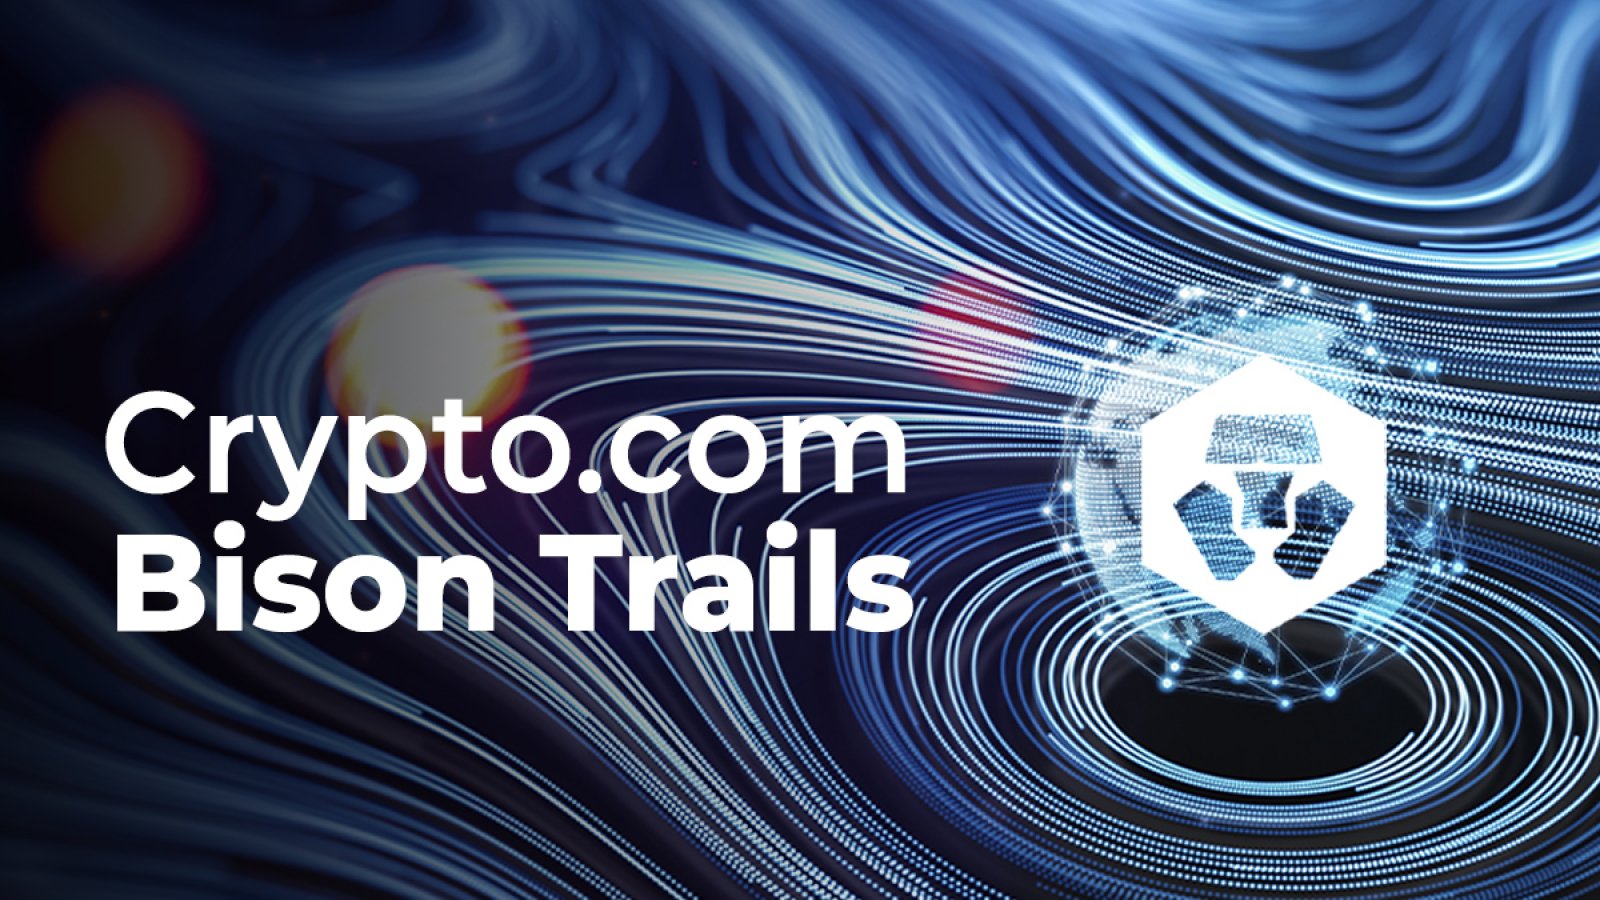 Crypto.com Enlists Bison Trails to Provide Validator Node Infrastructure for its Chain Testnet and Upcoming Mainnet